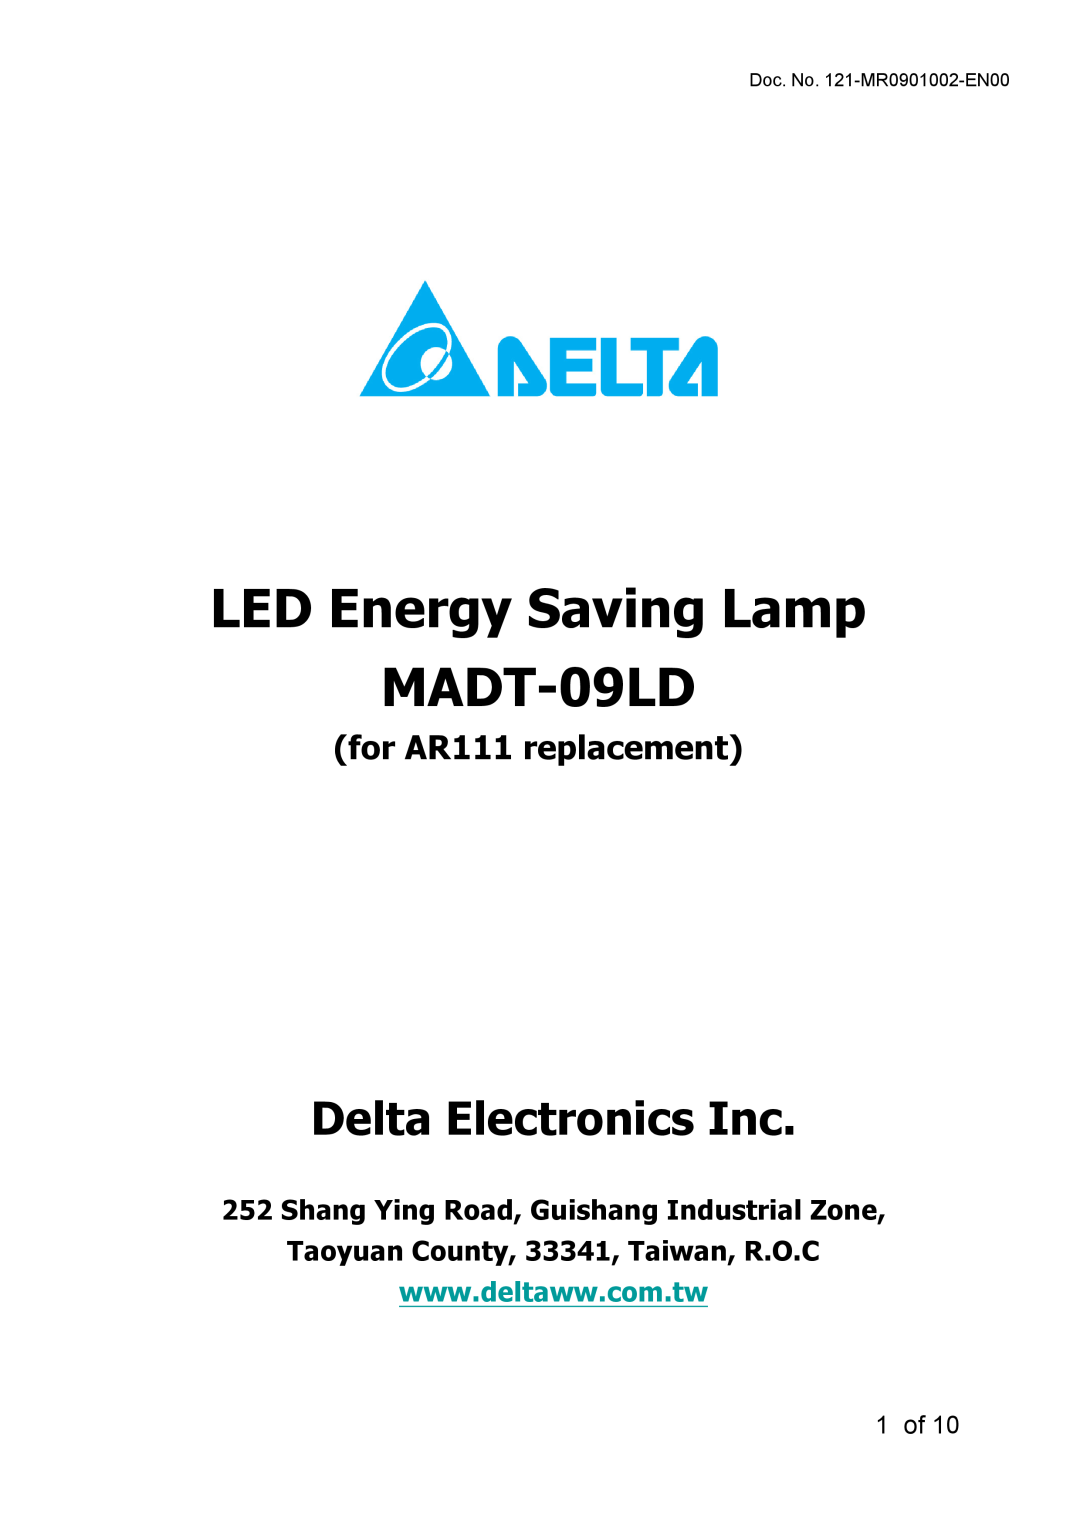 Delta Electronics manual 1 of, LED Energy Saving Lamp MADT-09LD, Delta Electronics Inc, for AR111 replacement 